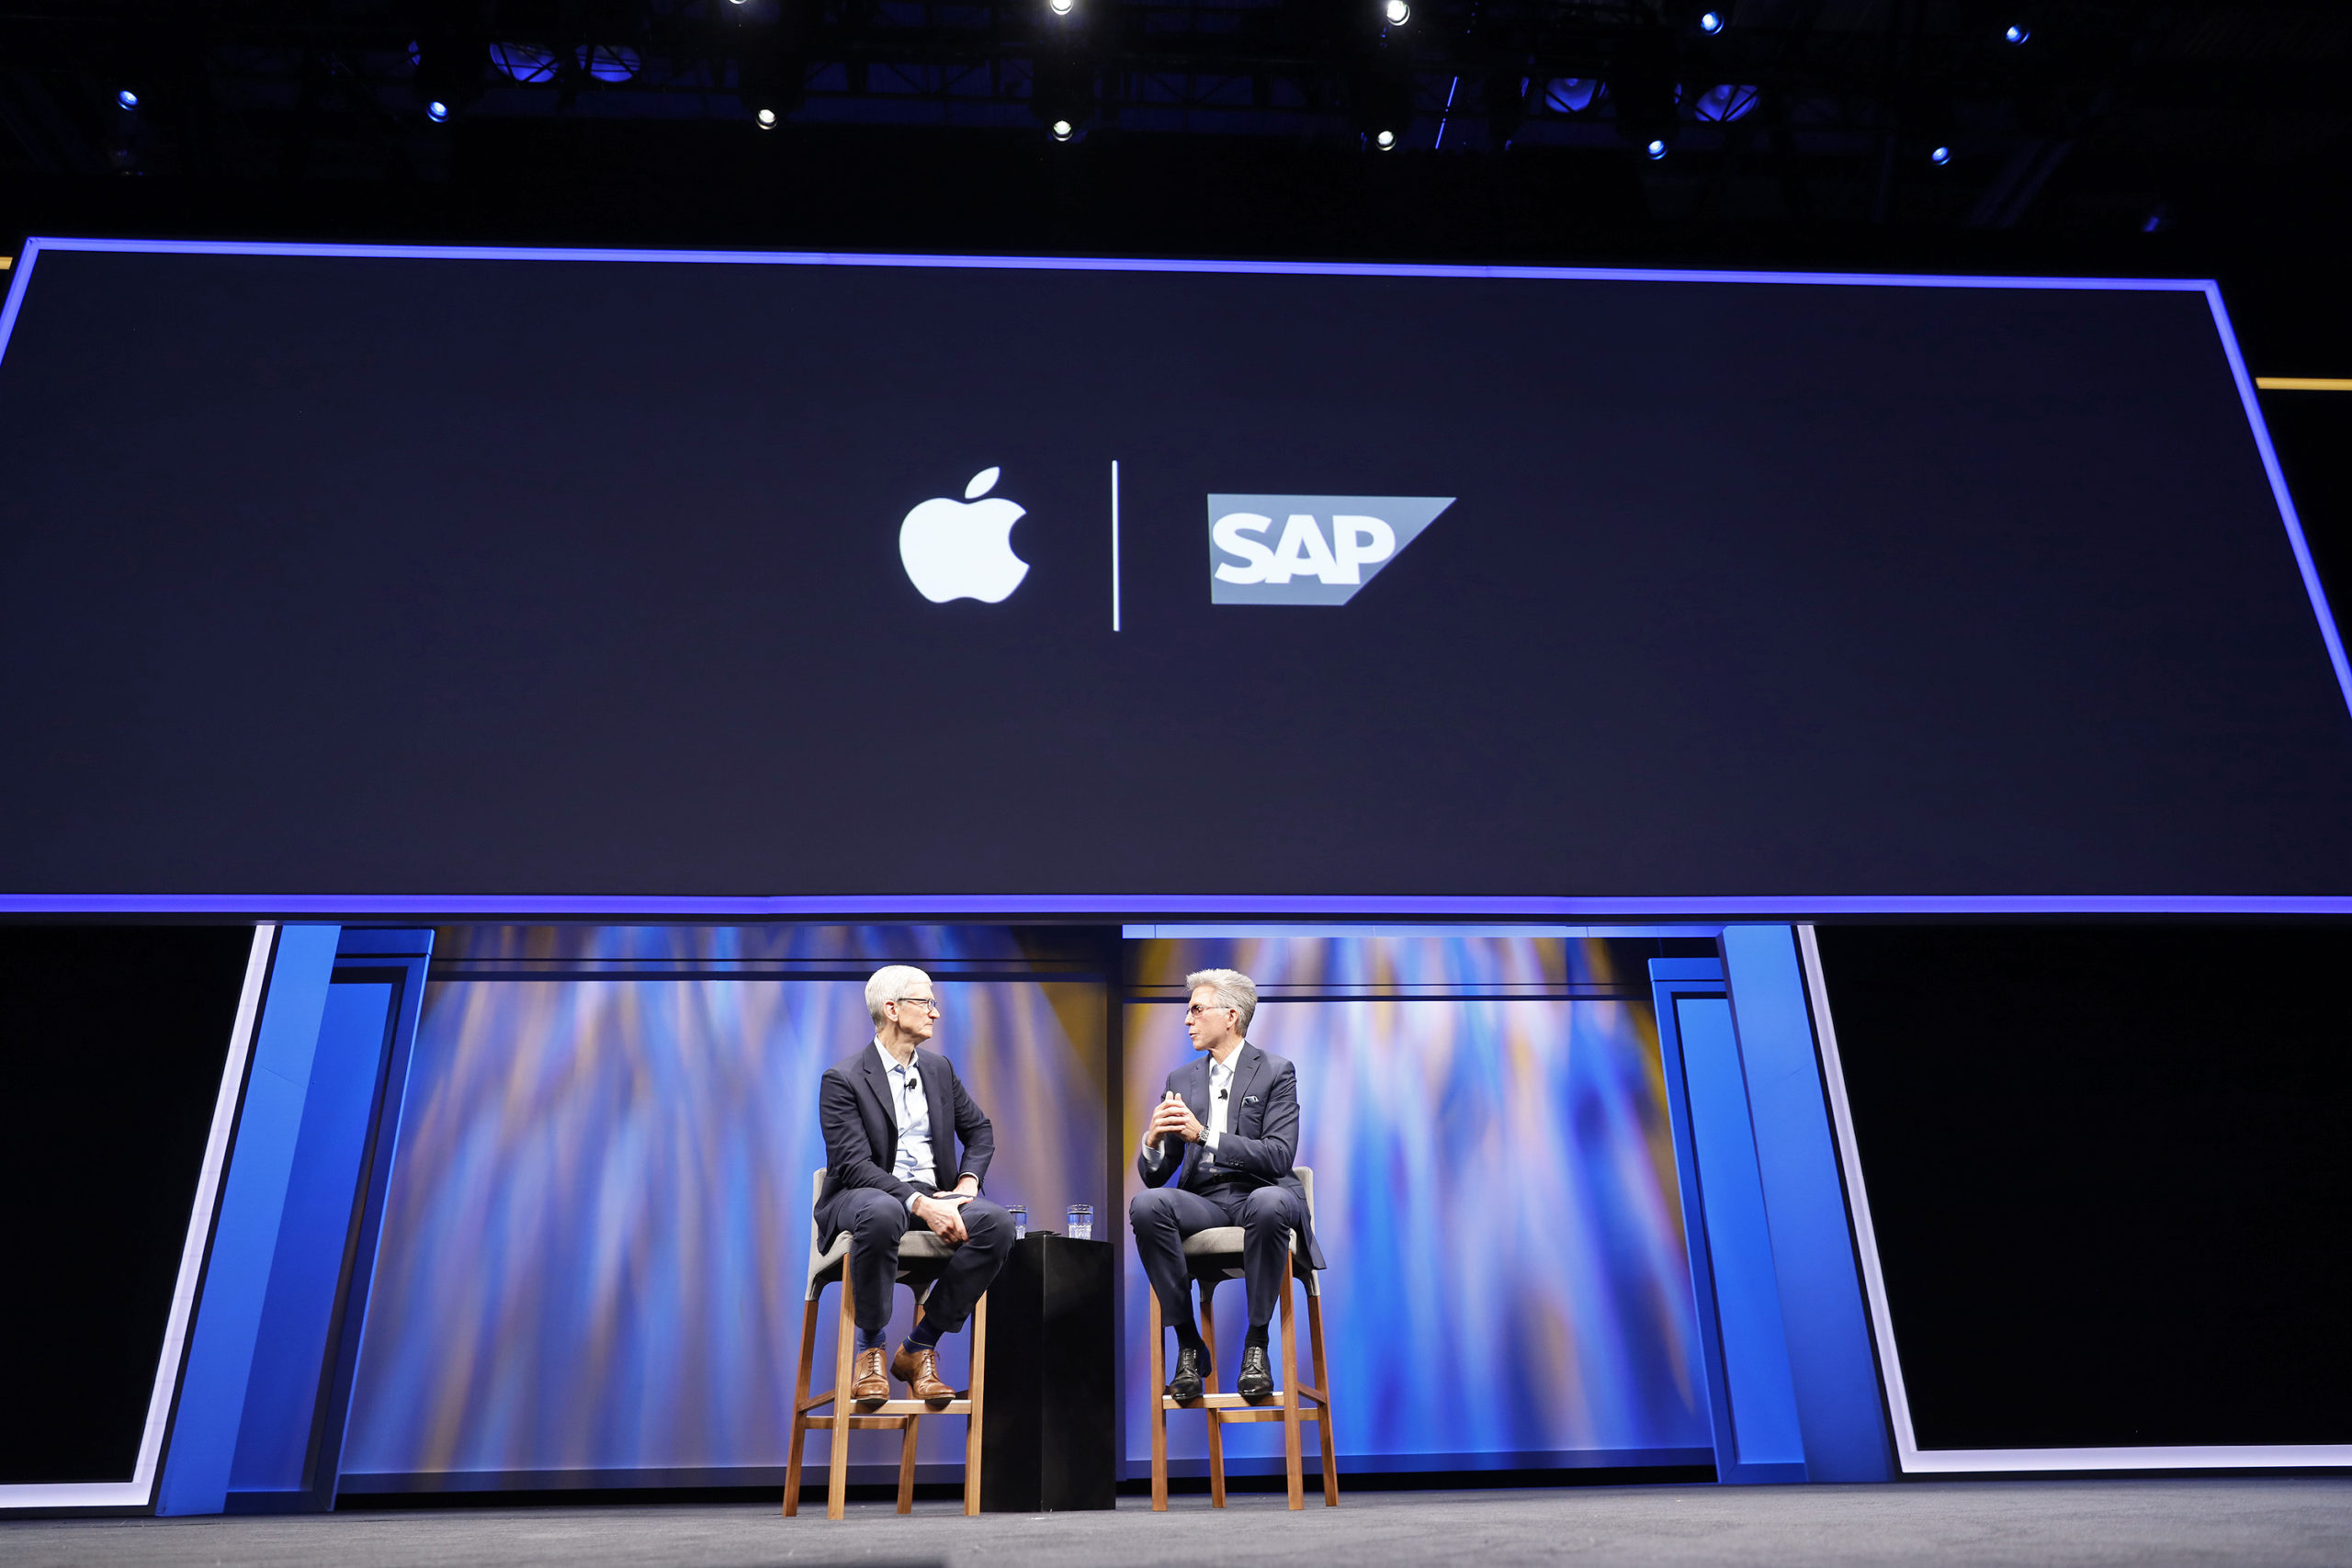 Tim Cook and Bill McDermott speak about SAP's New positioning: "Experience Company"